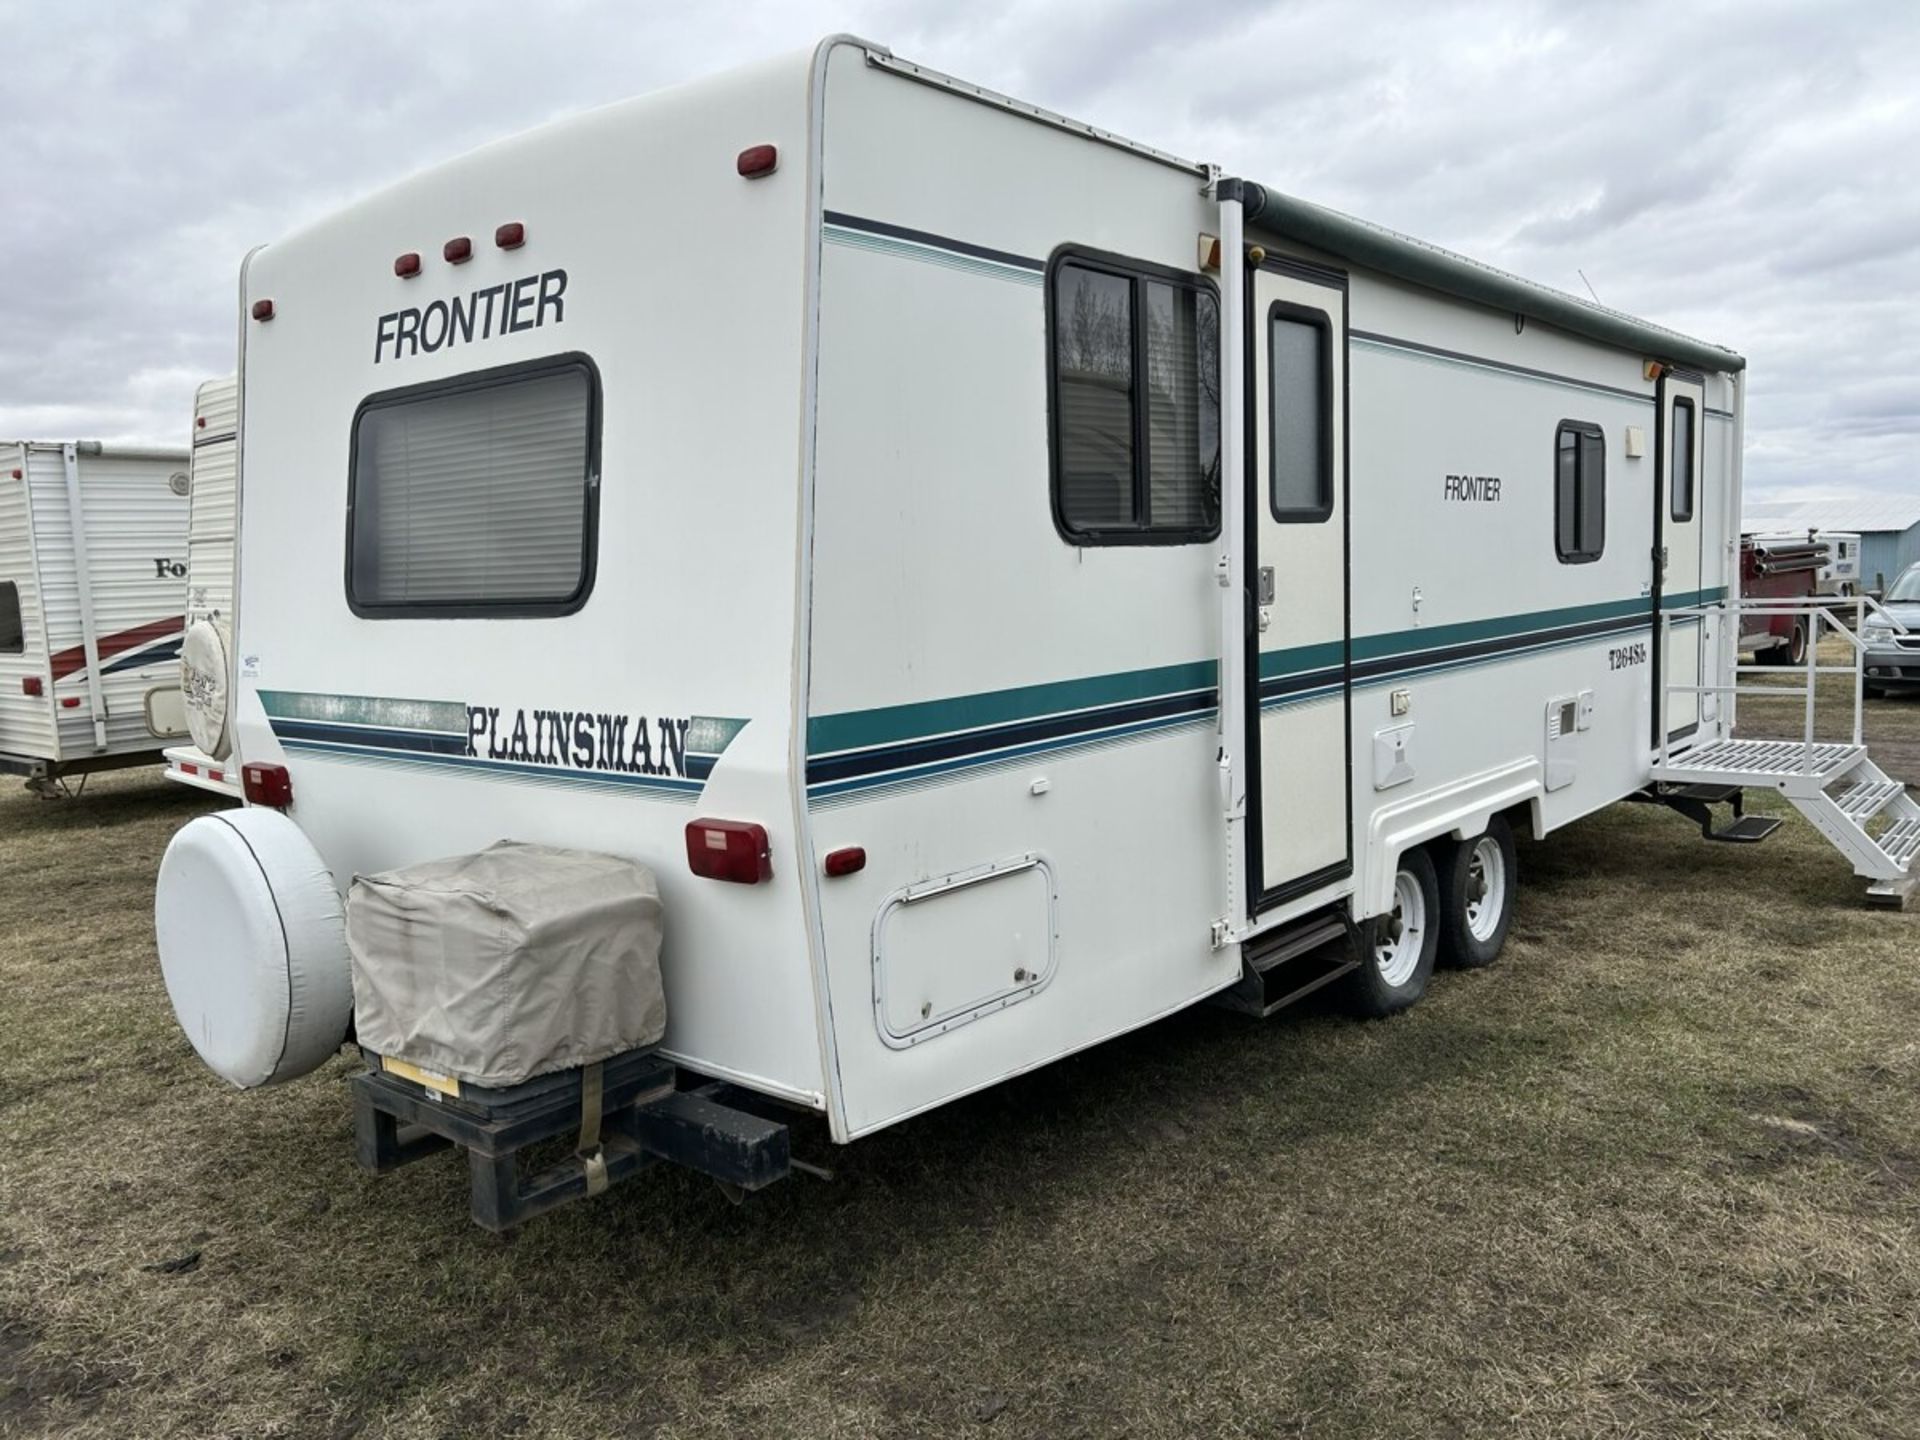 1999 FRONTIER PLAINSMAN T264SL 25 FT HOLIDAY TRAILER, SLIDE OUT, NOTE: CUSTOM STEP SOLD SEPERATELY - Image 5 of 17